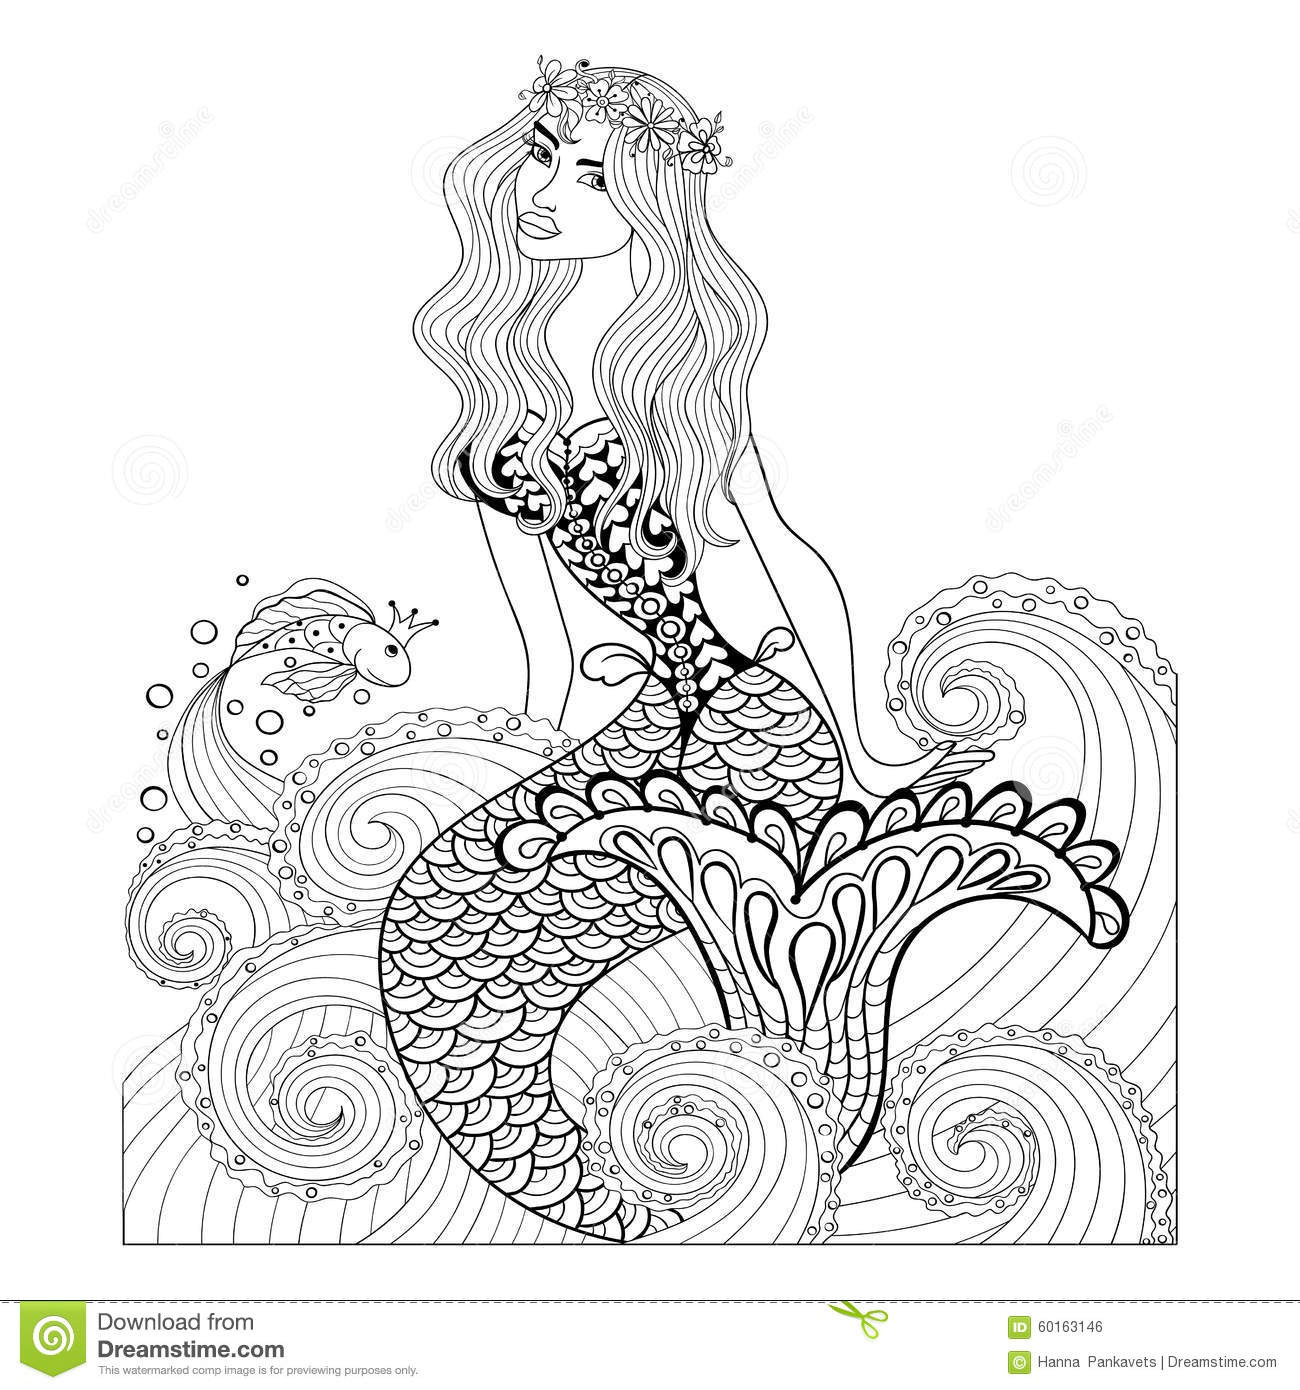 Ocean Waves Coloring Pages For Adults
 Fantastic Mermaid In Sea Waves With A Goldfish And Wreath